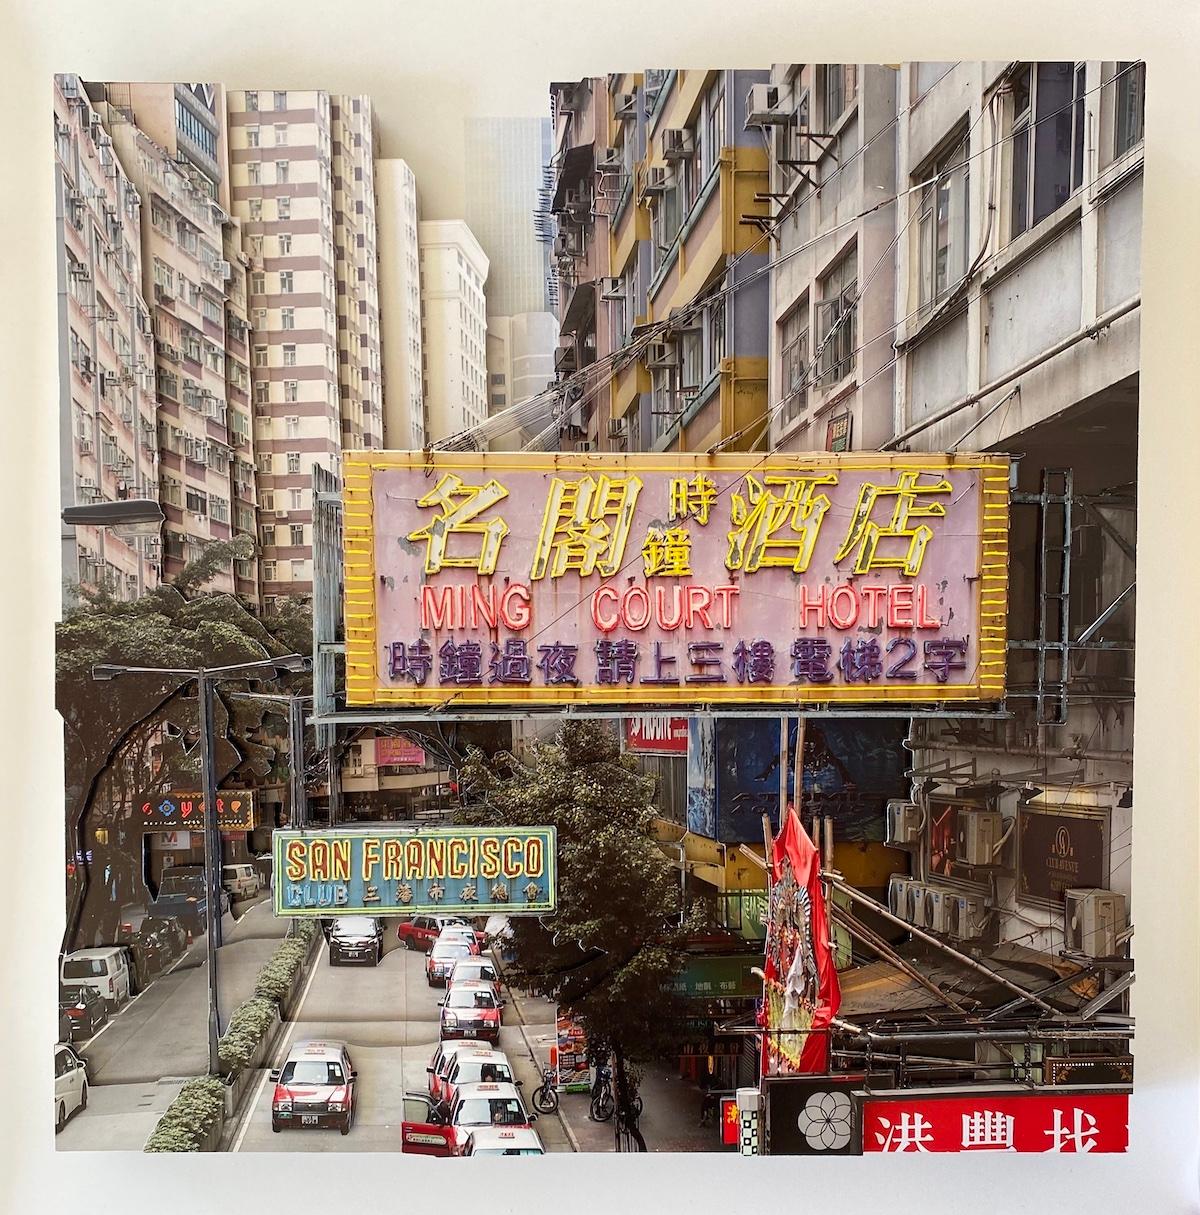 "Ming Court Hotel" by Camille Levert, 27.5 x 27.5 x 4 in, 2023